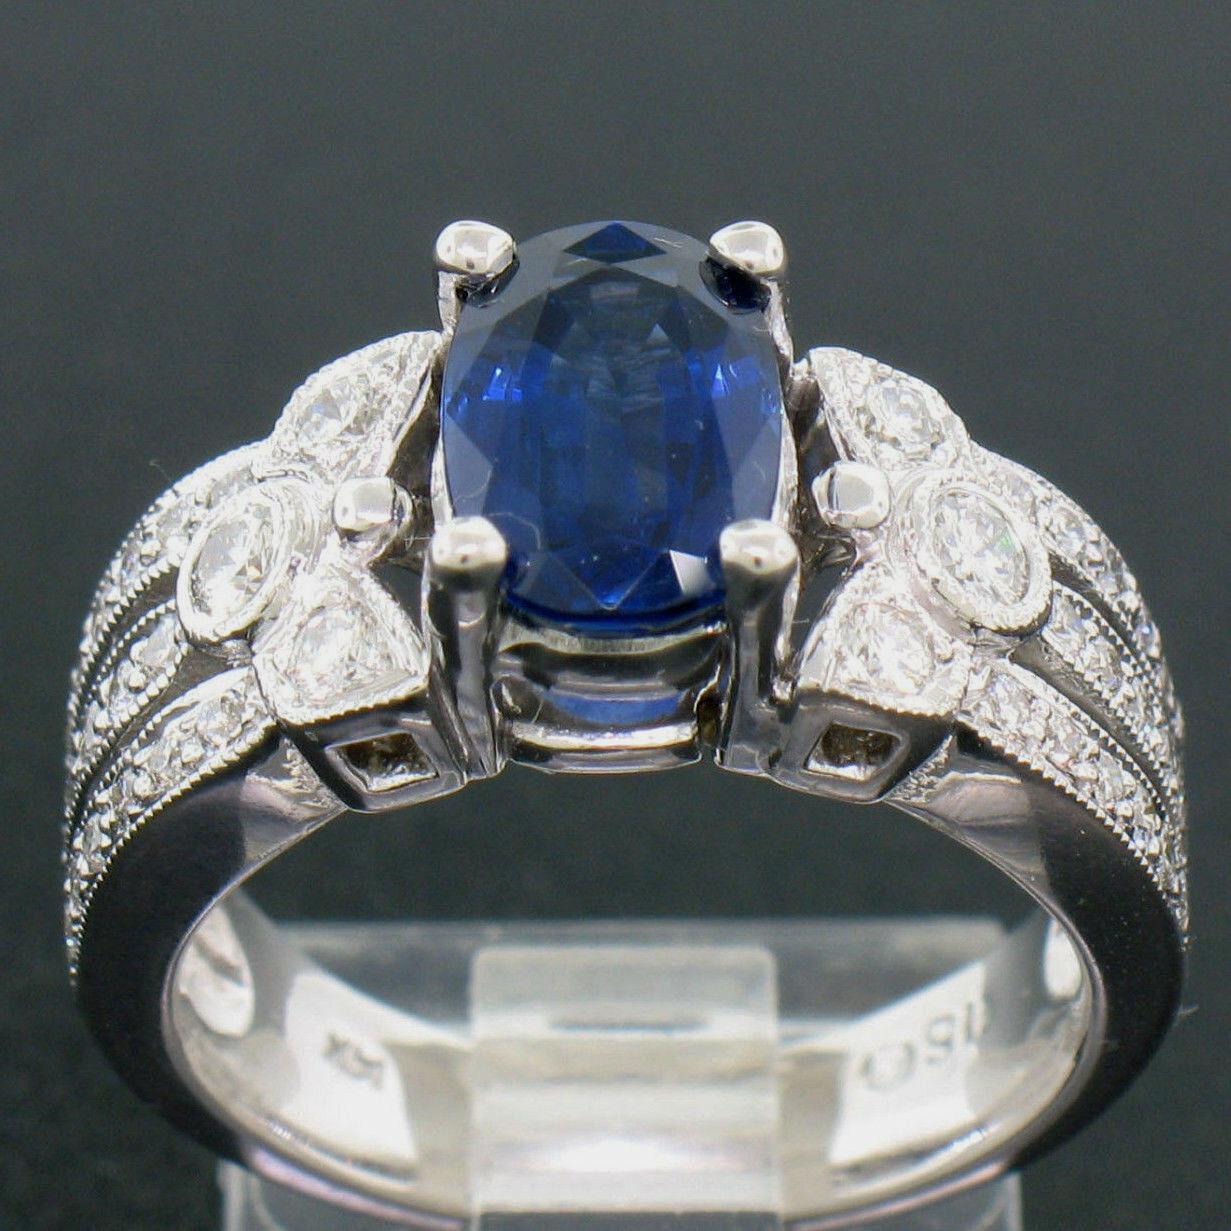 A top quality, 2.18 carat, oval cut, ROYAL BLUE SAPPHIRE sits in a superbly crafted, unique, 4 prong mounting with a wide milgrain design set with SUPER FINE  diamonds running down the sides. A nice, wide, and beautiful mounting! UNIQUE, SUPER FINE